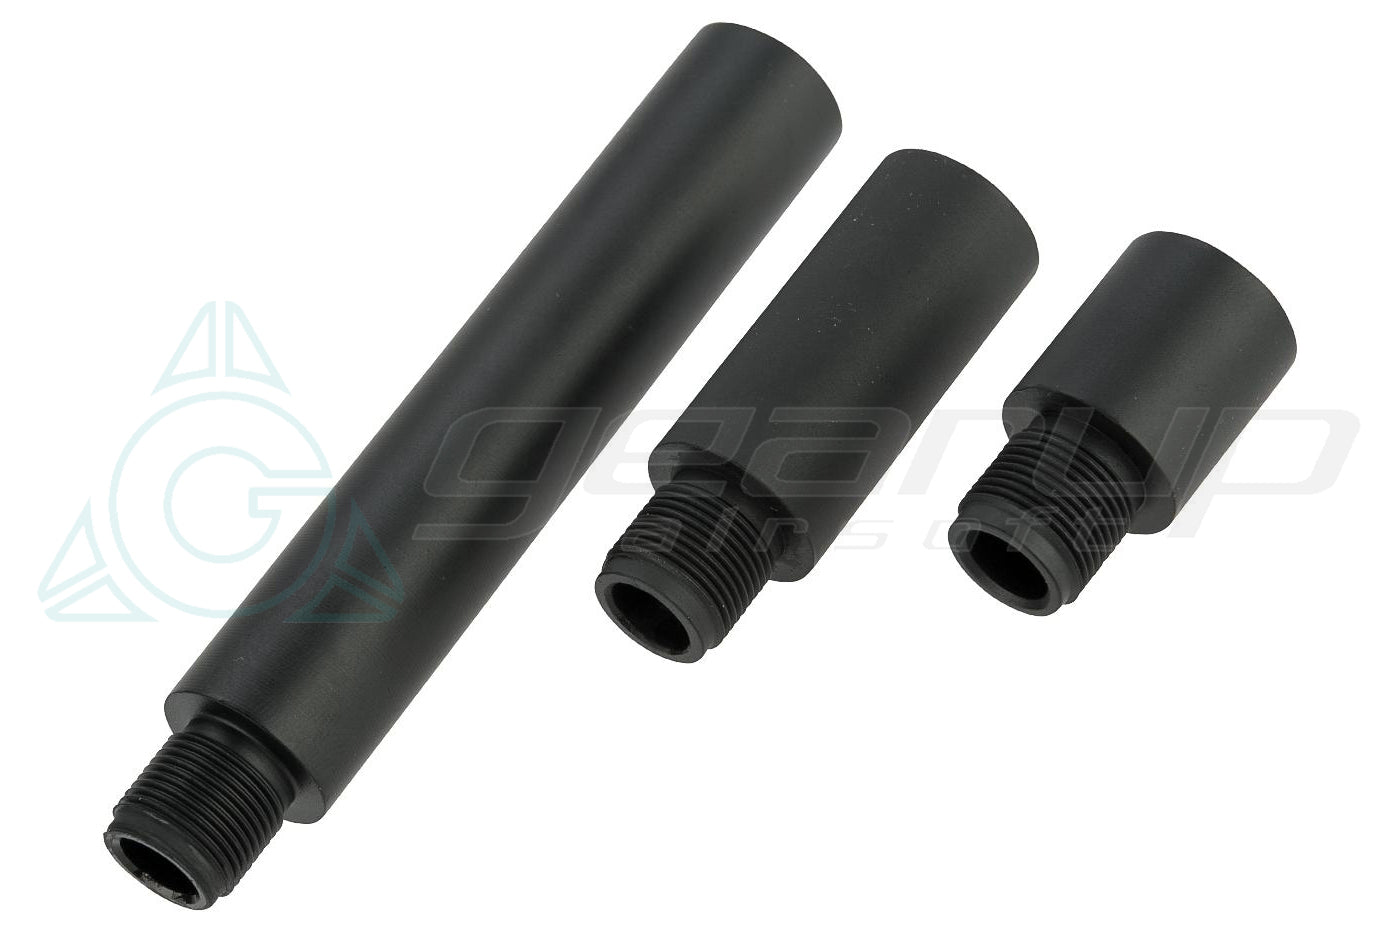 Raven Barrel Extention Pack (includes 1", 2" 3" in one pack)